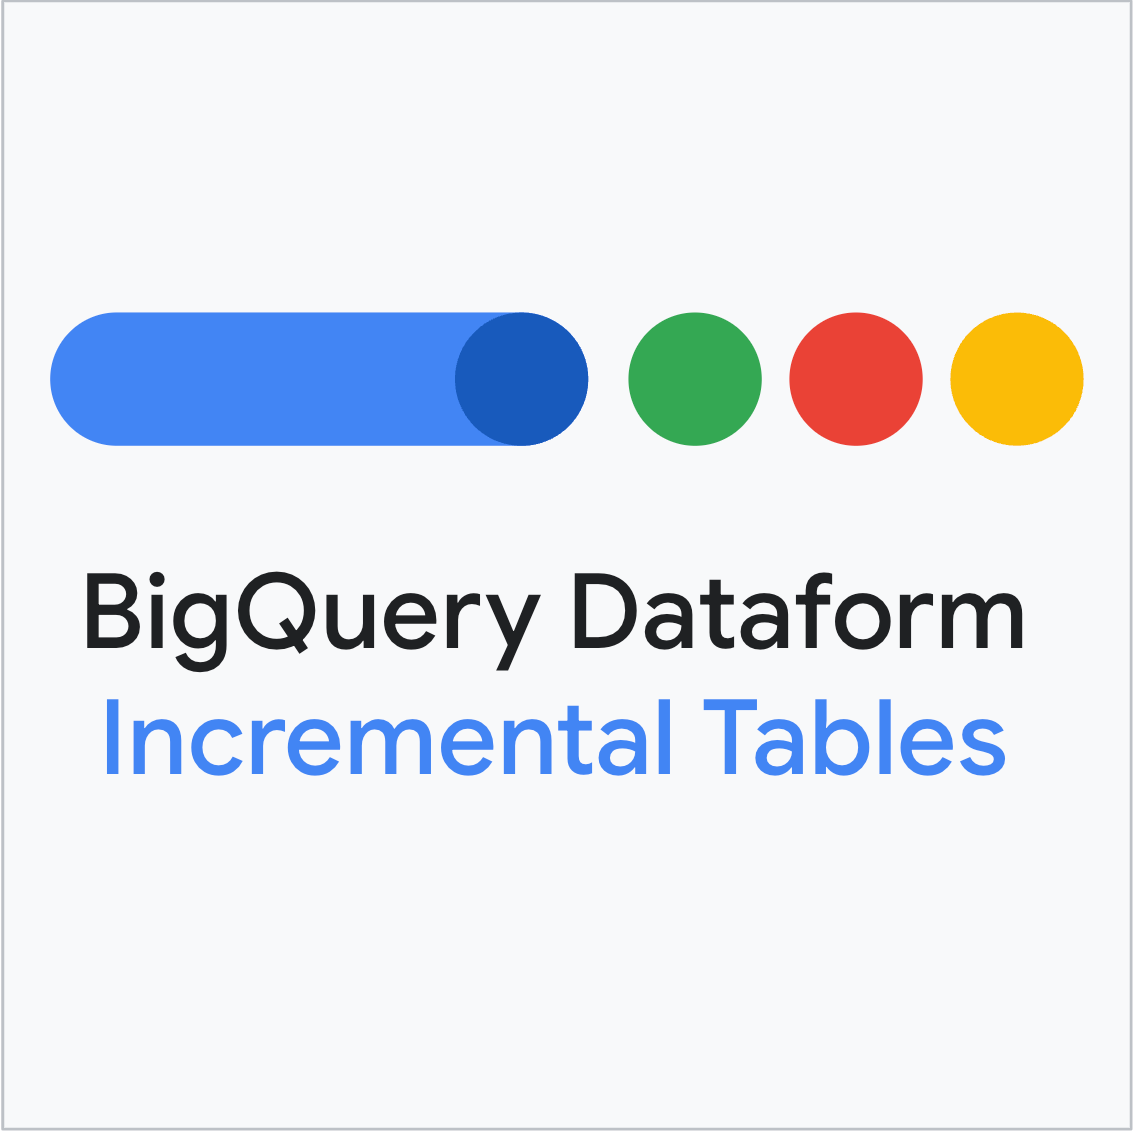 Modern data pipeline building with BigQuery Dataform — Part 2: Incremental Tables